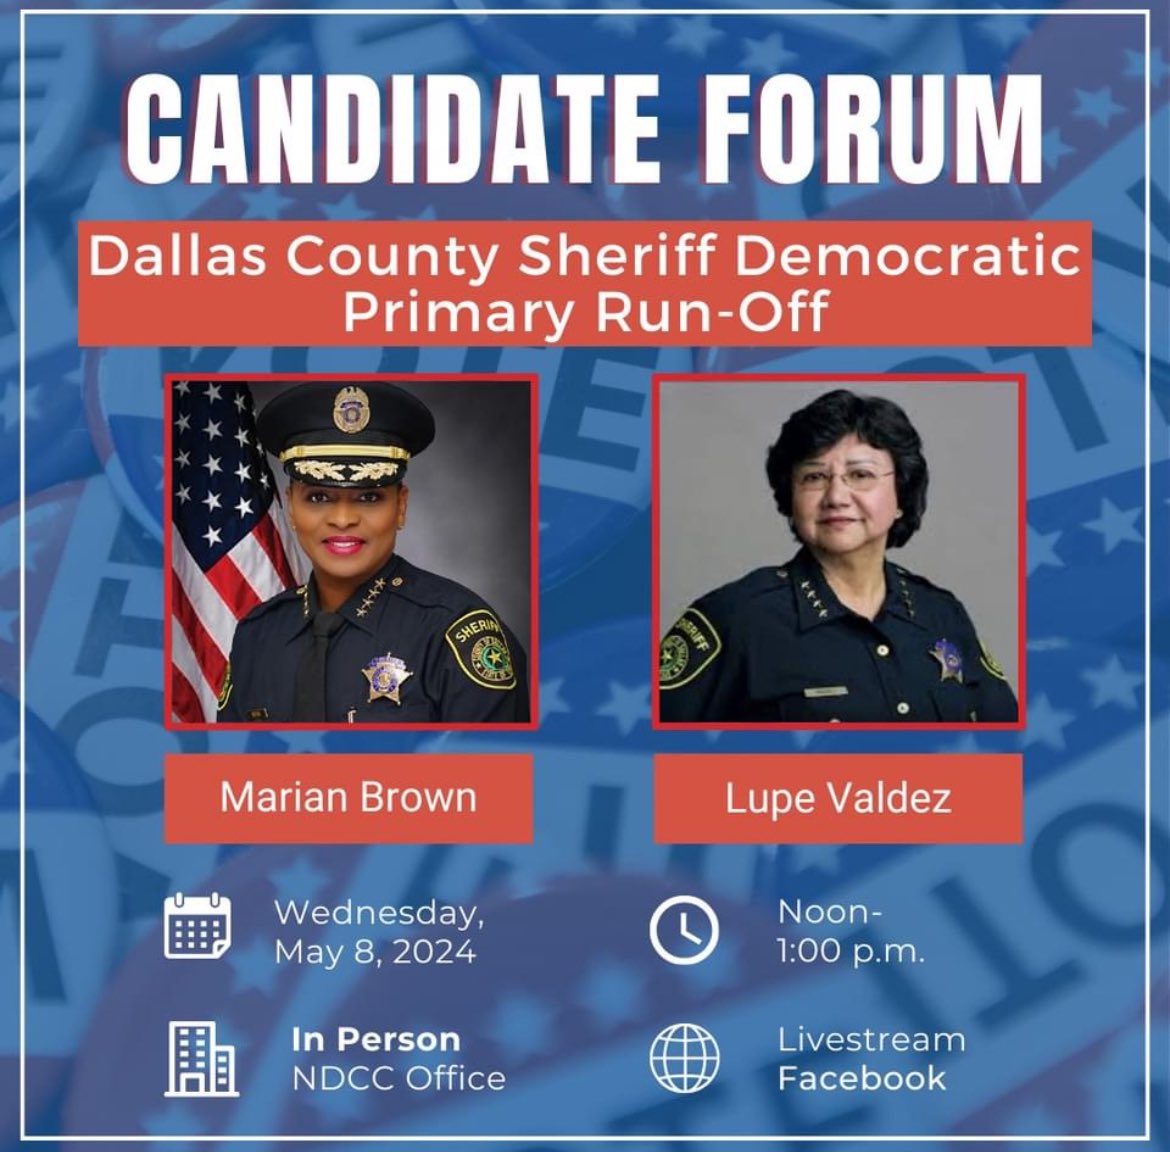 Candidate forum on Wednesday, May 8 at noon with the candidates for Dallas County Sheriff (@SheriffMBrown14 and @LupeValdez). No charge to attend and lunch included. Please RSVP and ndcc.org.